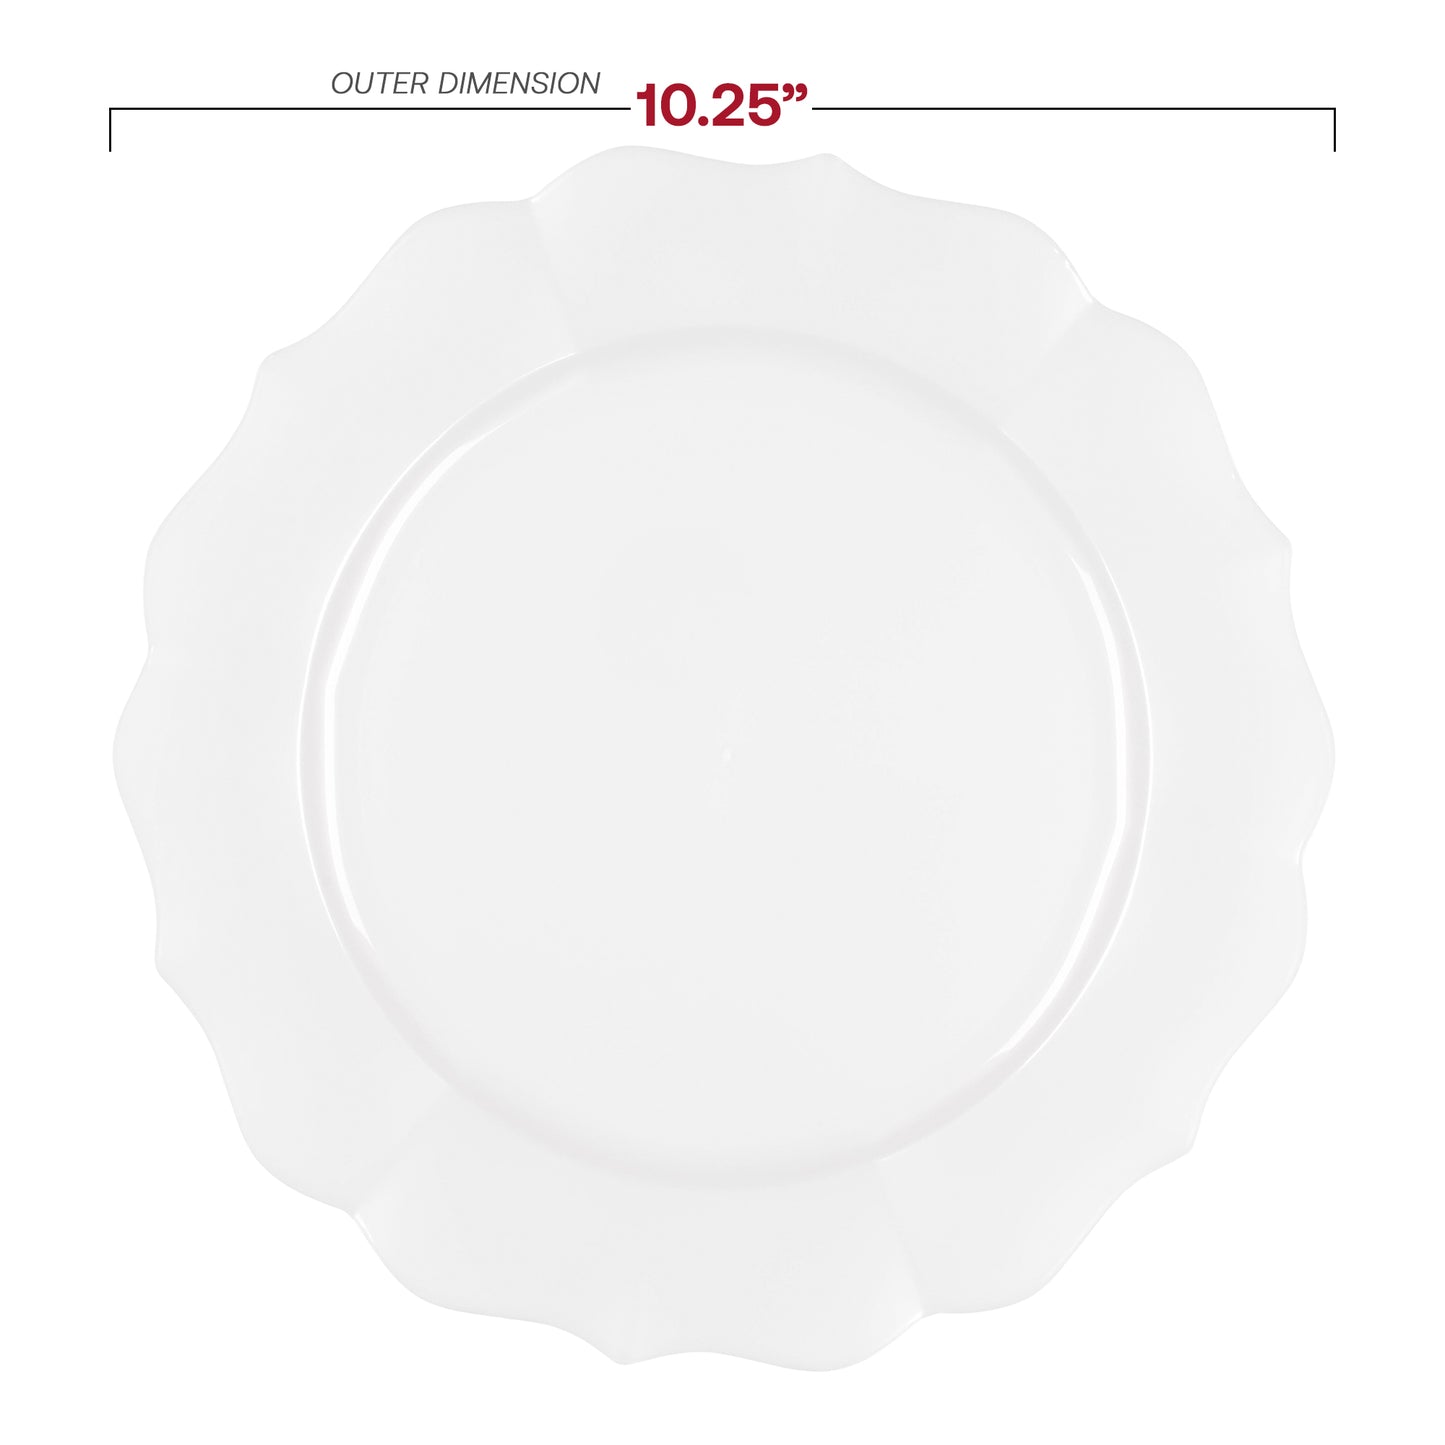 Pearl White Round Lotus Plastic Dinner Plates (10.25") Dimension | The Kaya Collection